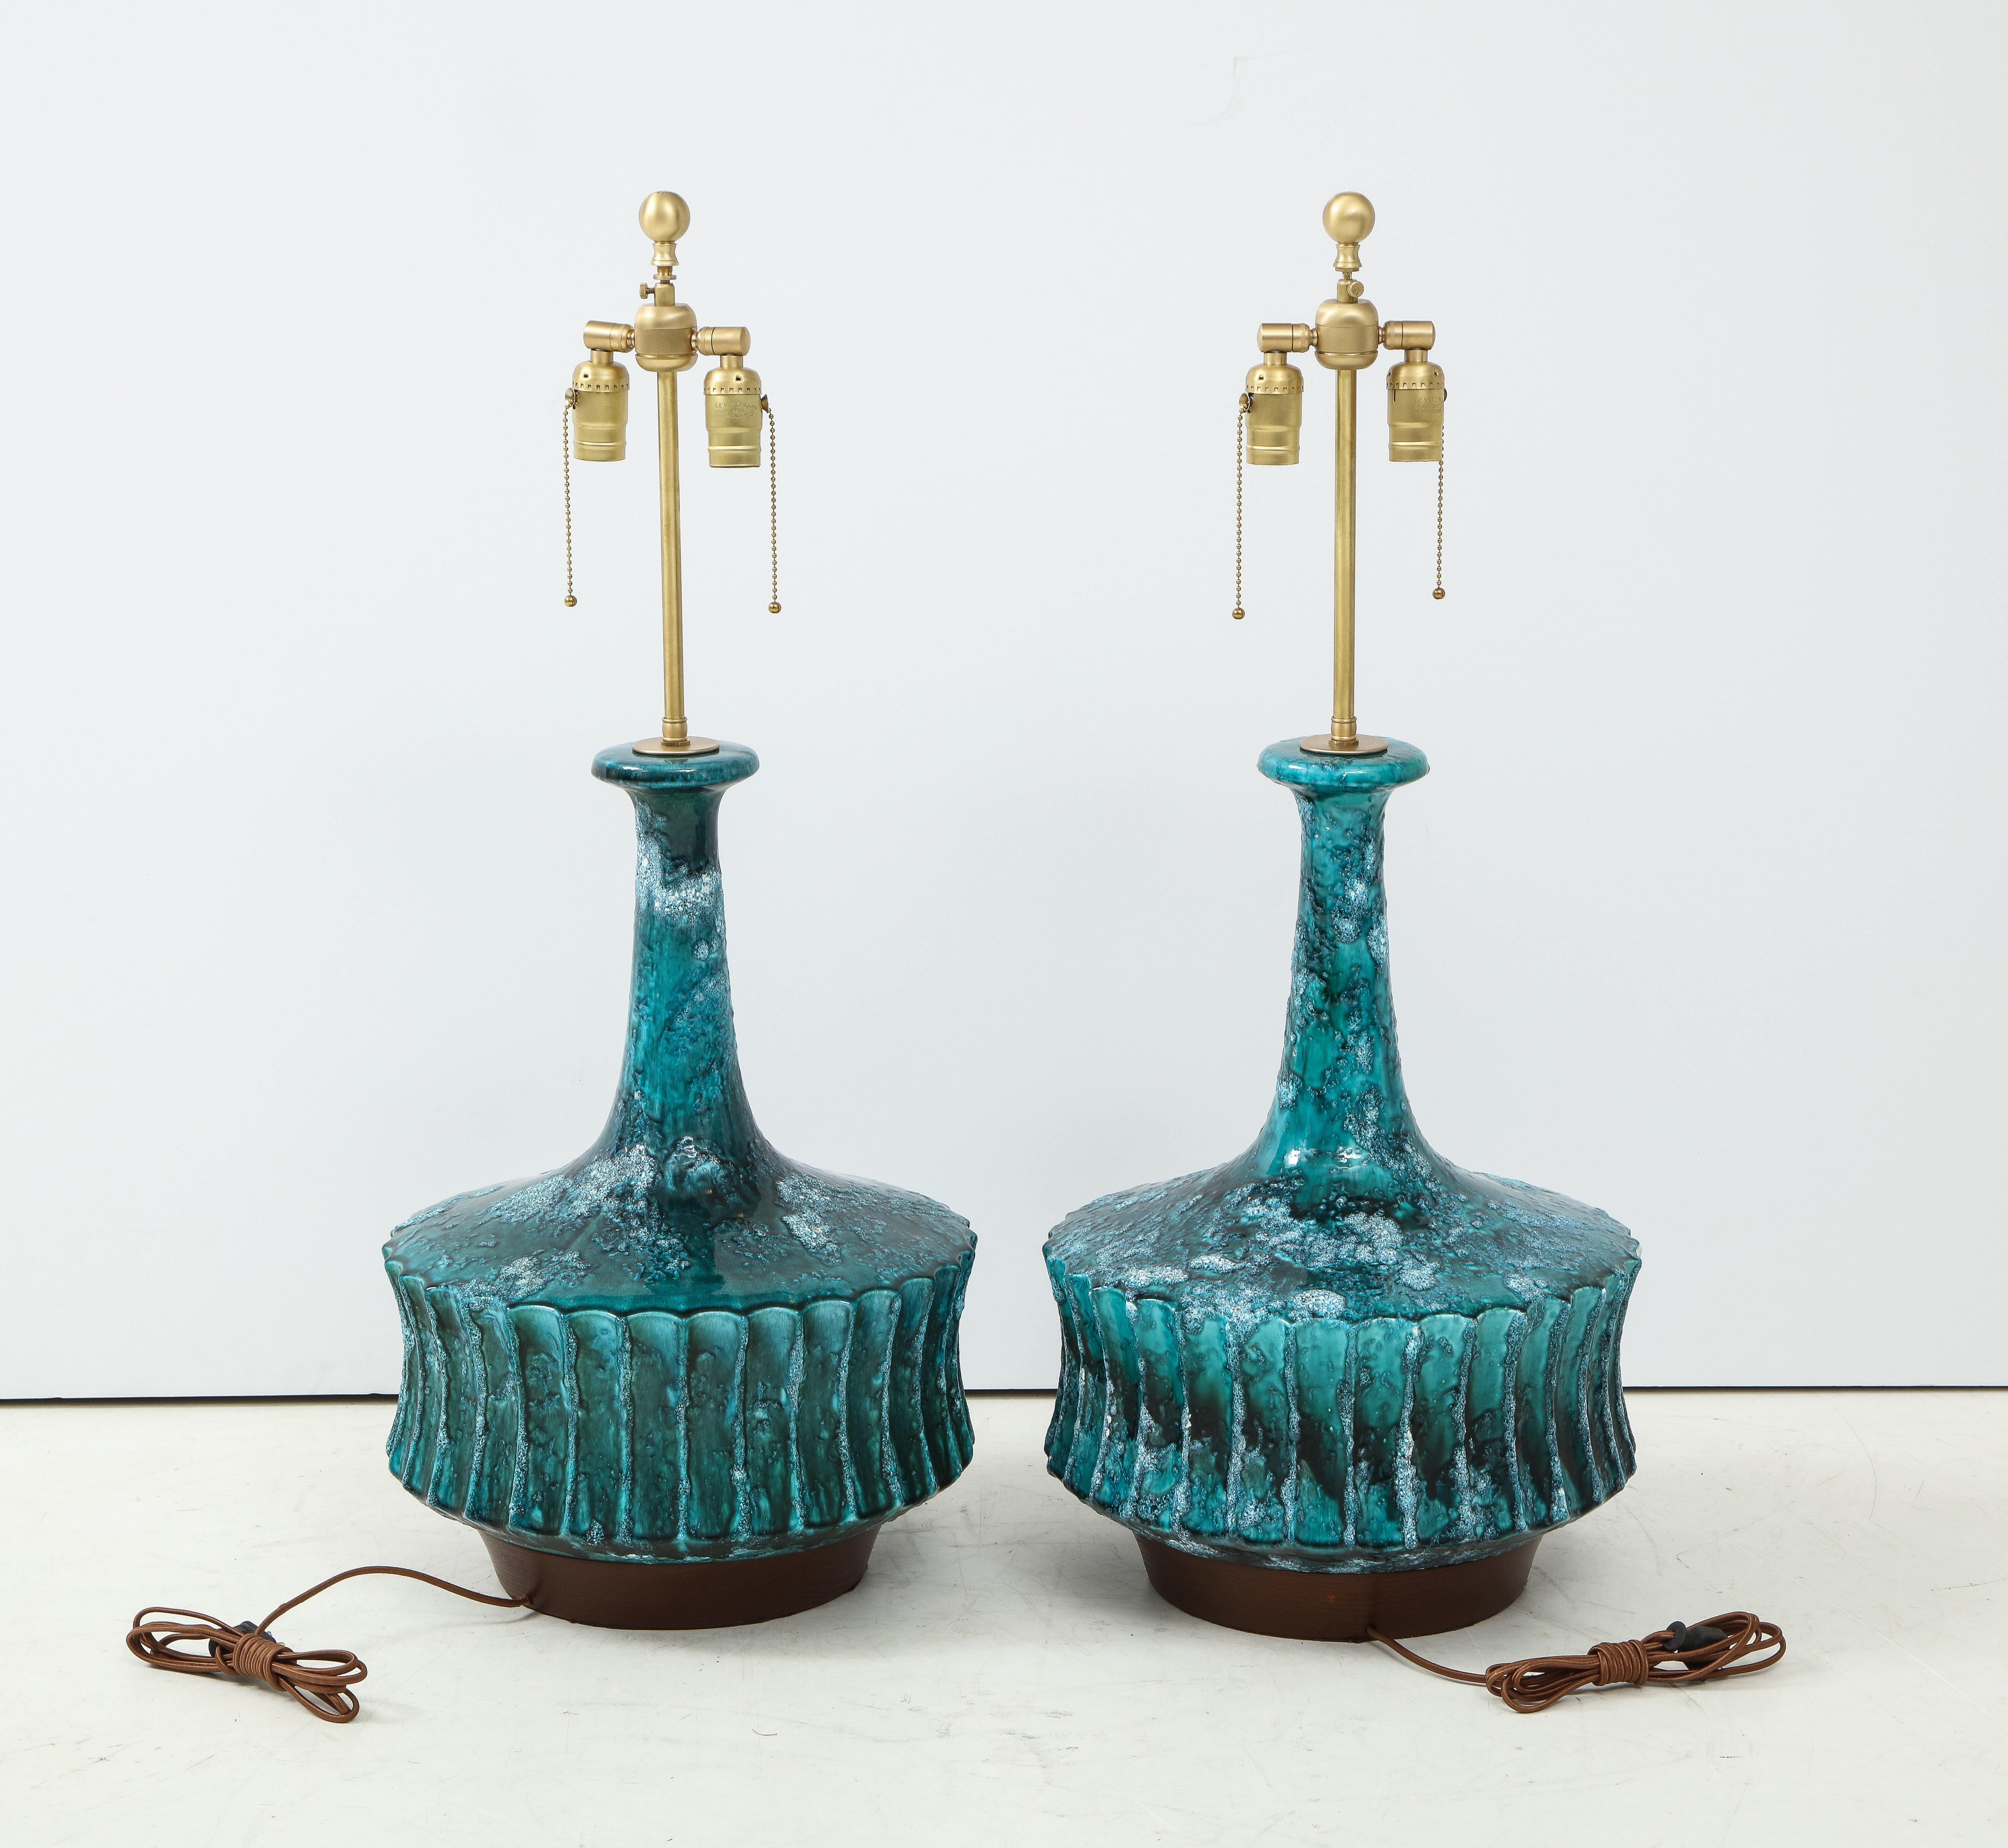 Pair of heavily glazed ceramic lamps with fluted body and elongated neck sitting on stacked walnut bases. Rewired for use in the USA with double pull chain sockets.